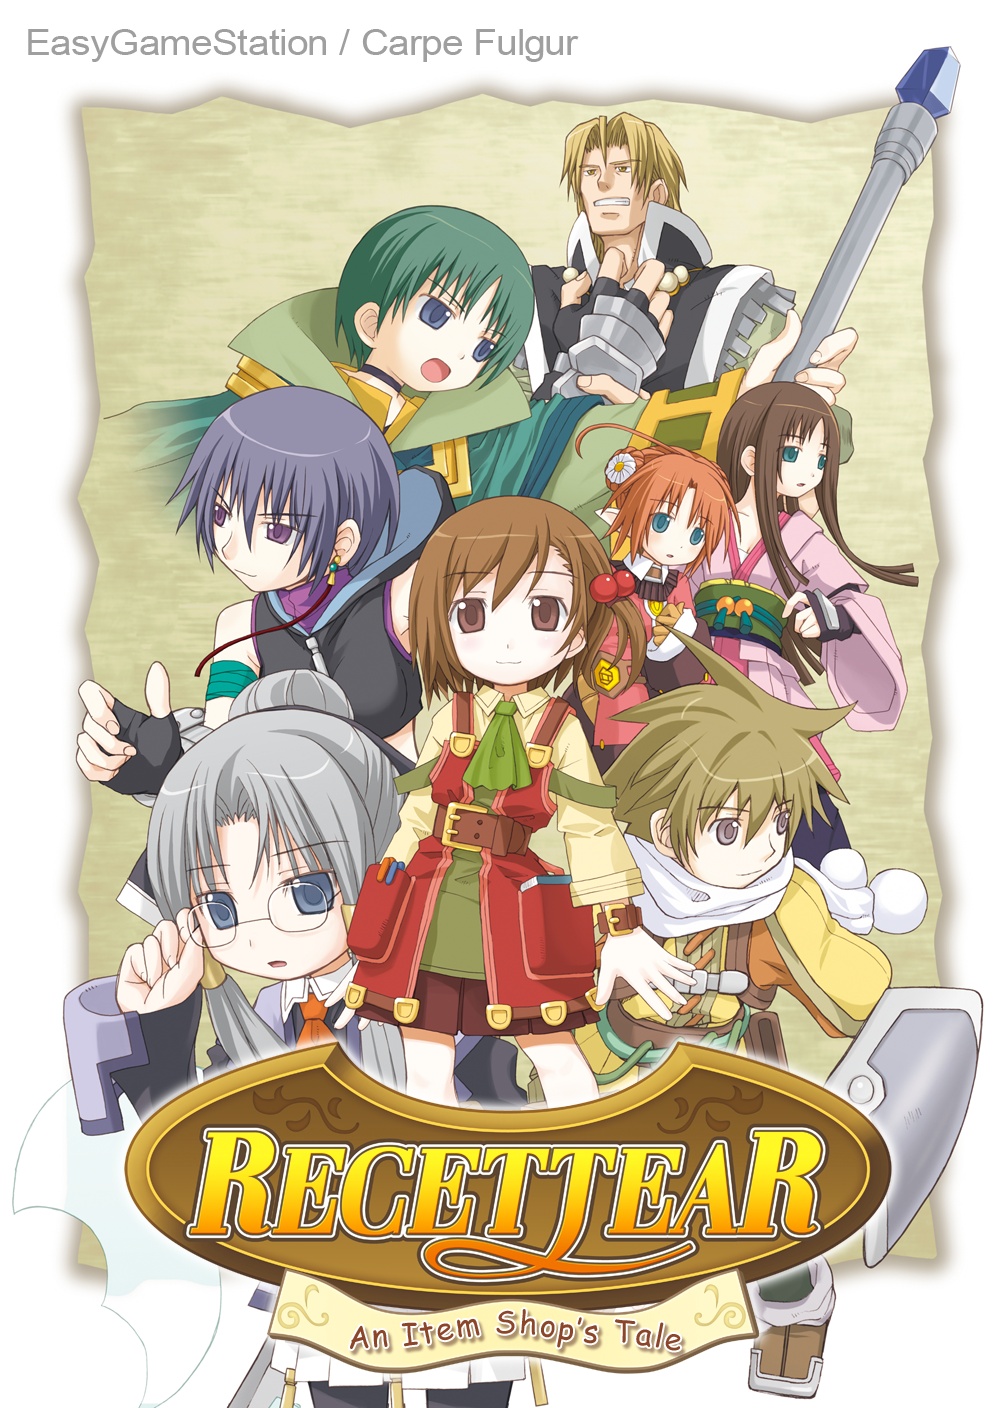 Recettear_Cover_(English).jpg